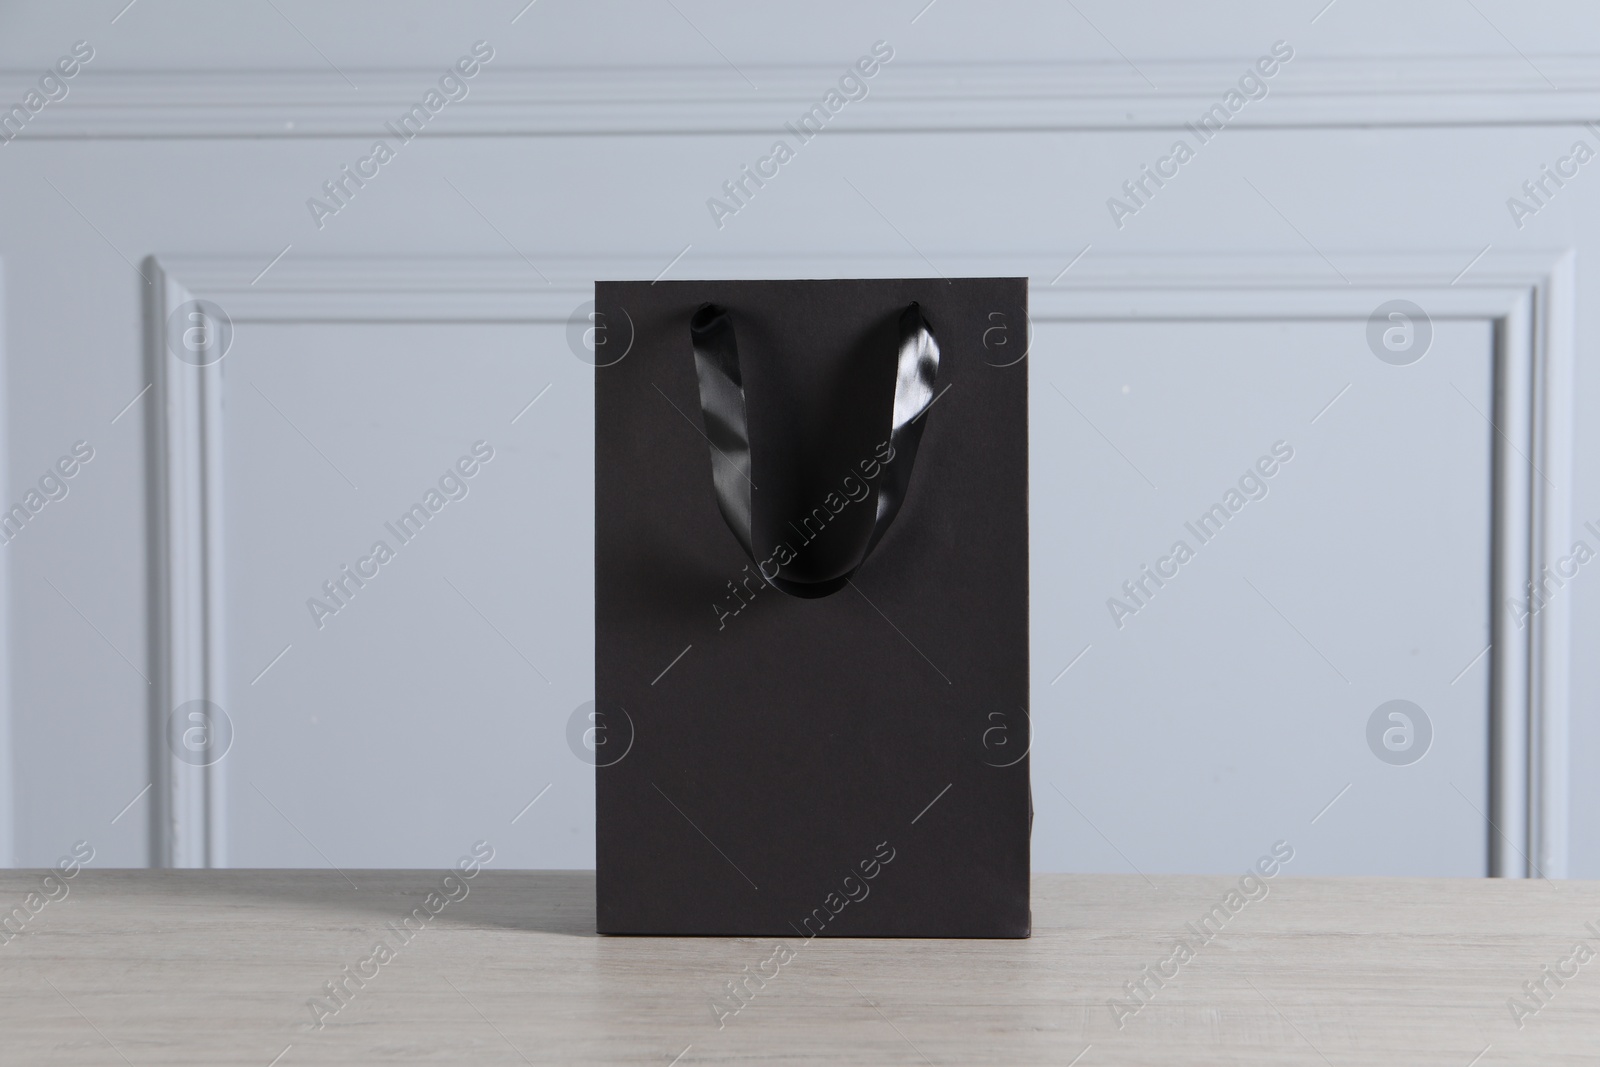 Photo of Black paper bag on wooden table against light grey wall